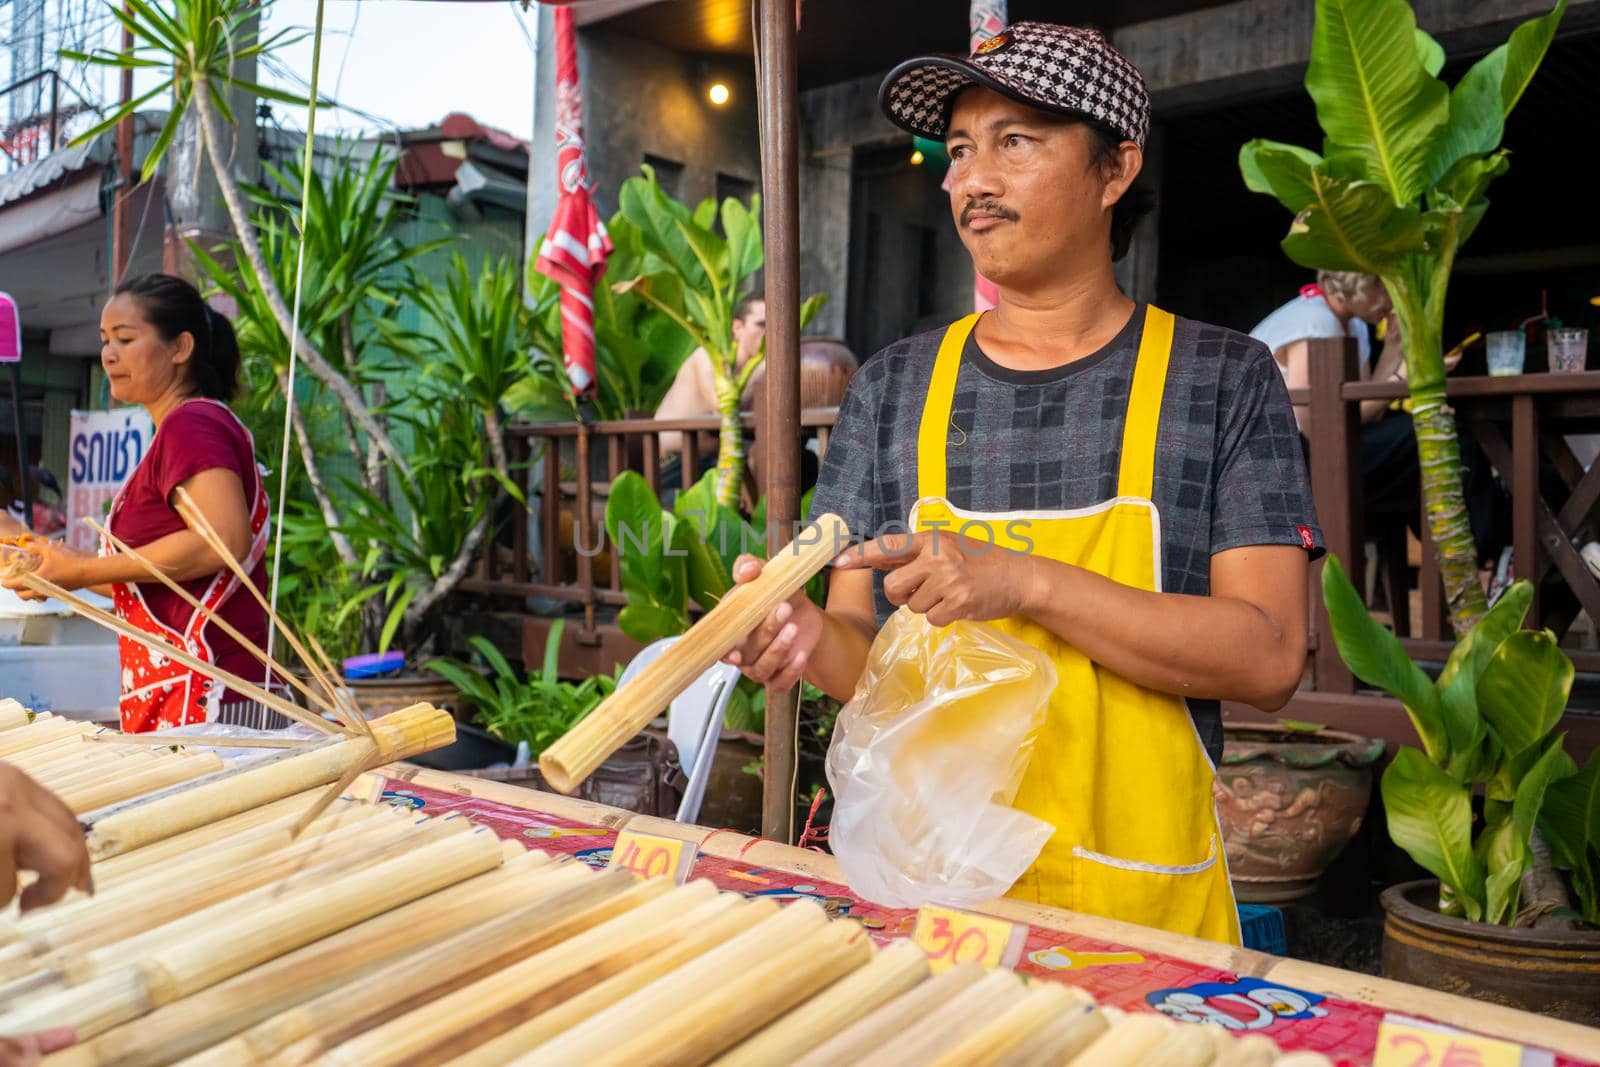 Street food market in Asia. A man sells rice in bamboo stalks by Try_my_best